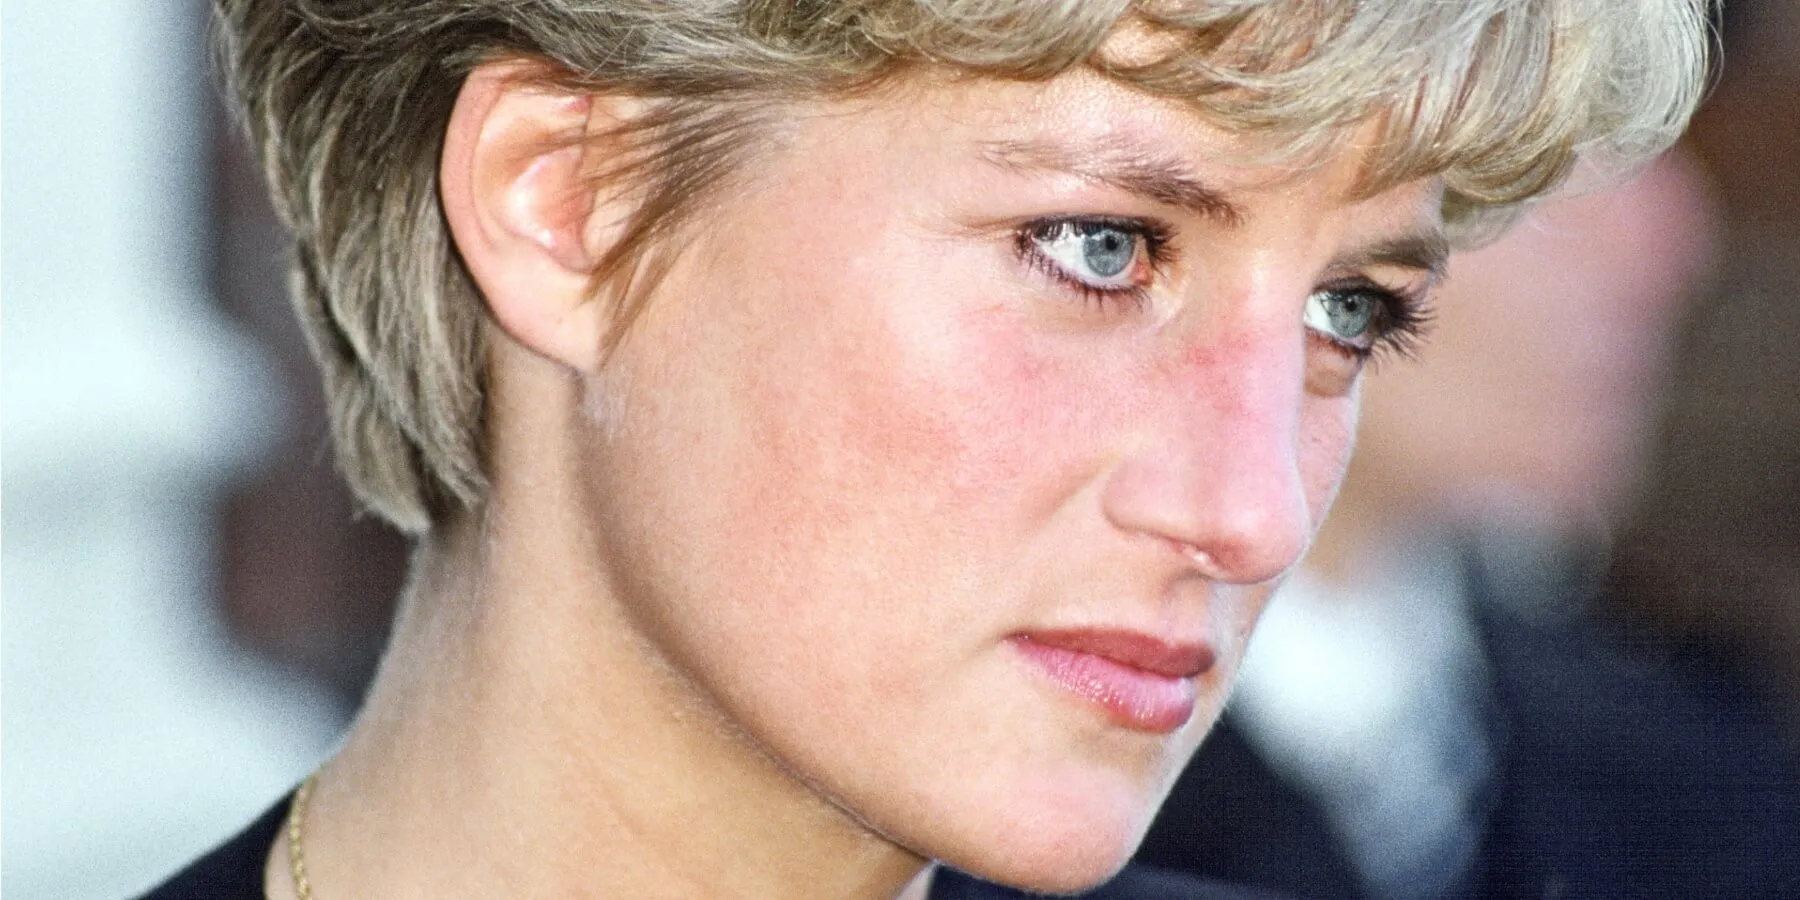 Princess Diana photographed in 1991